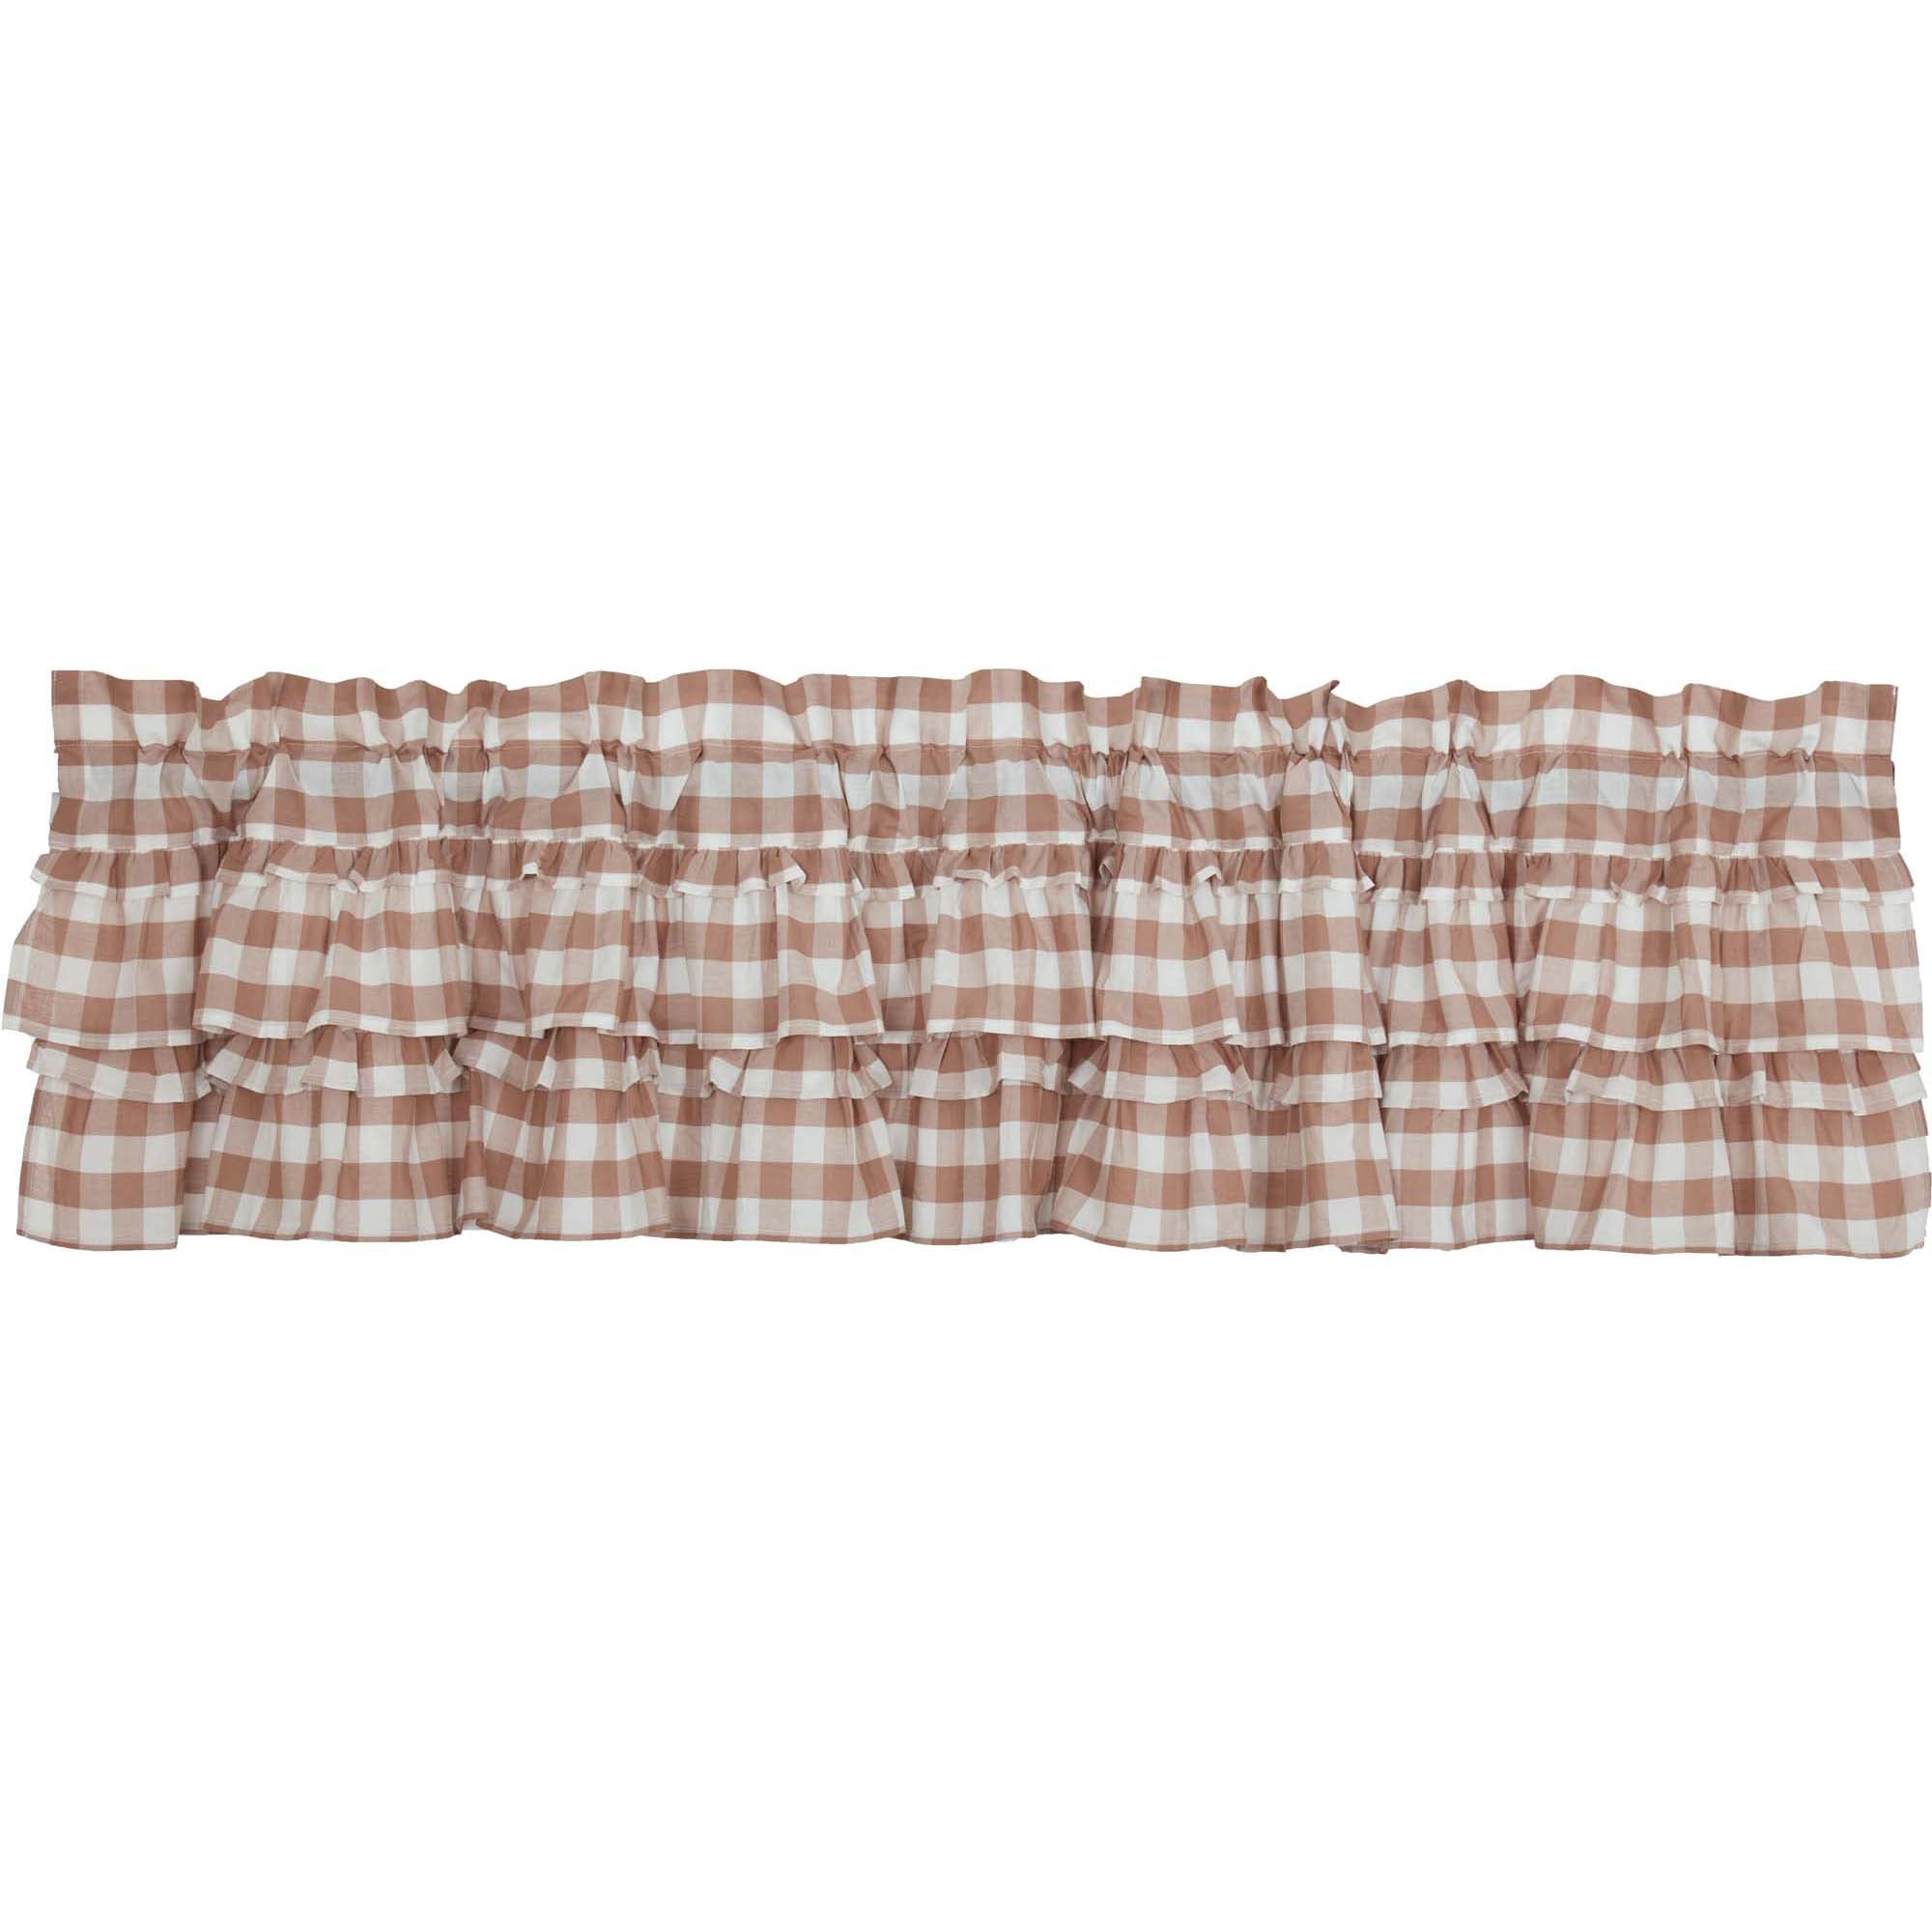 April & Olive Annie Buffalo Portabella Check Ruffled Valance 16x72 By VHC Brands